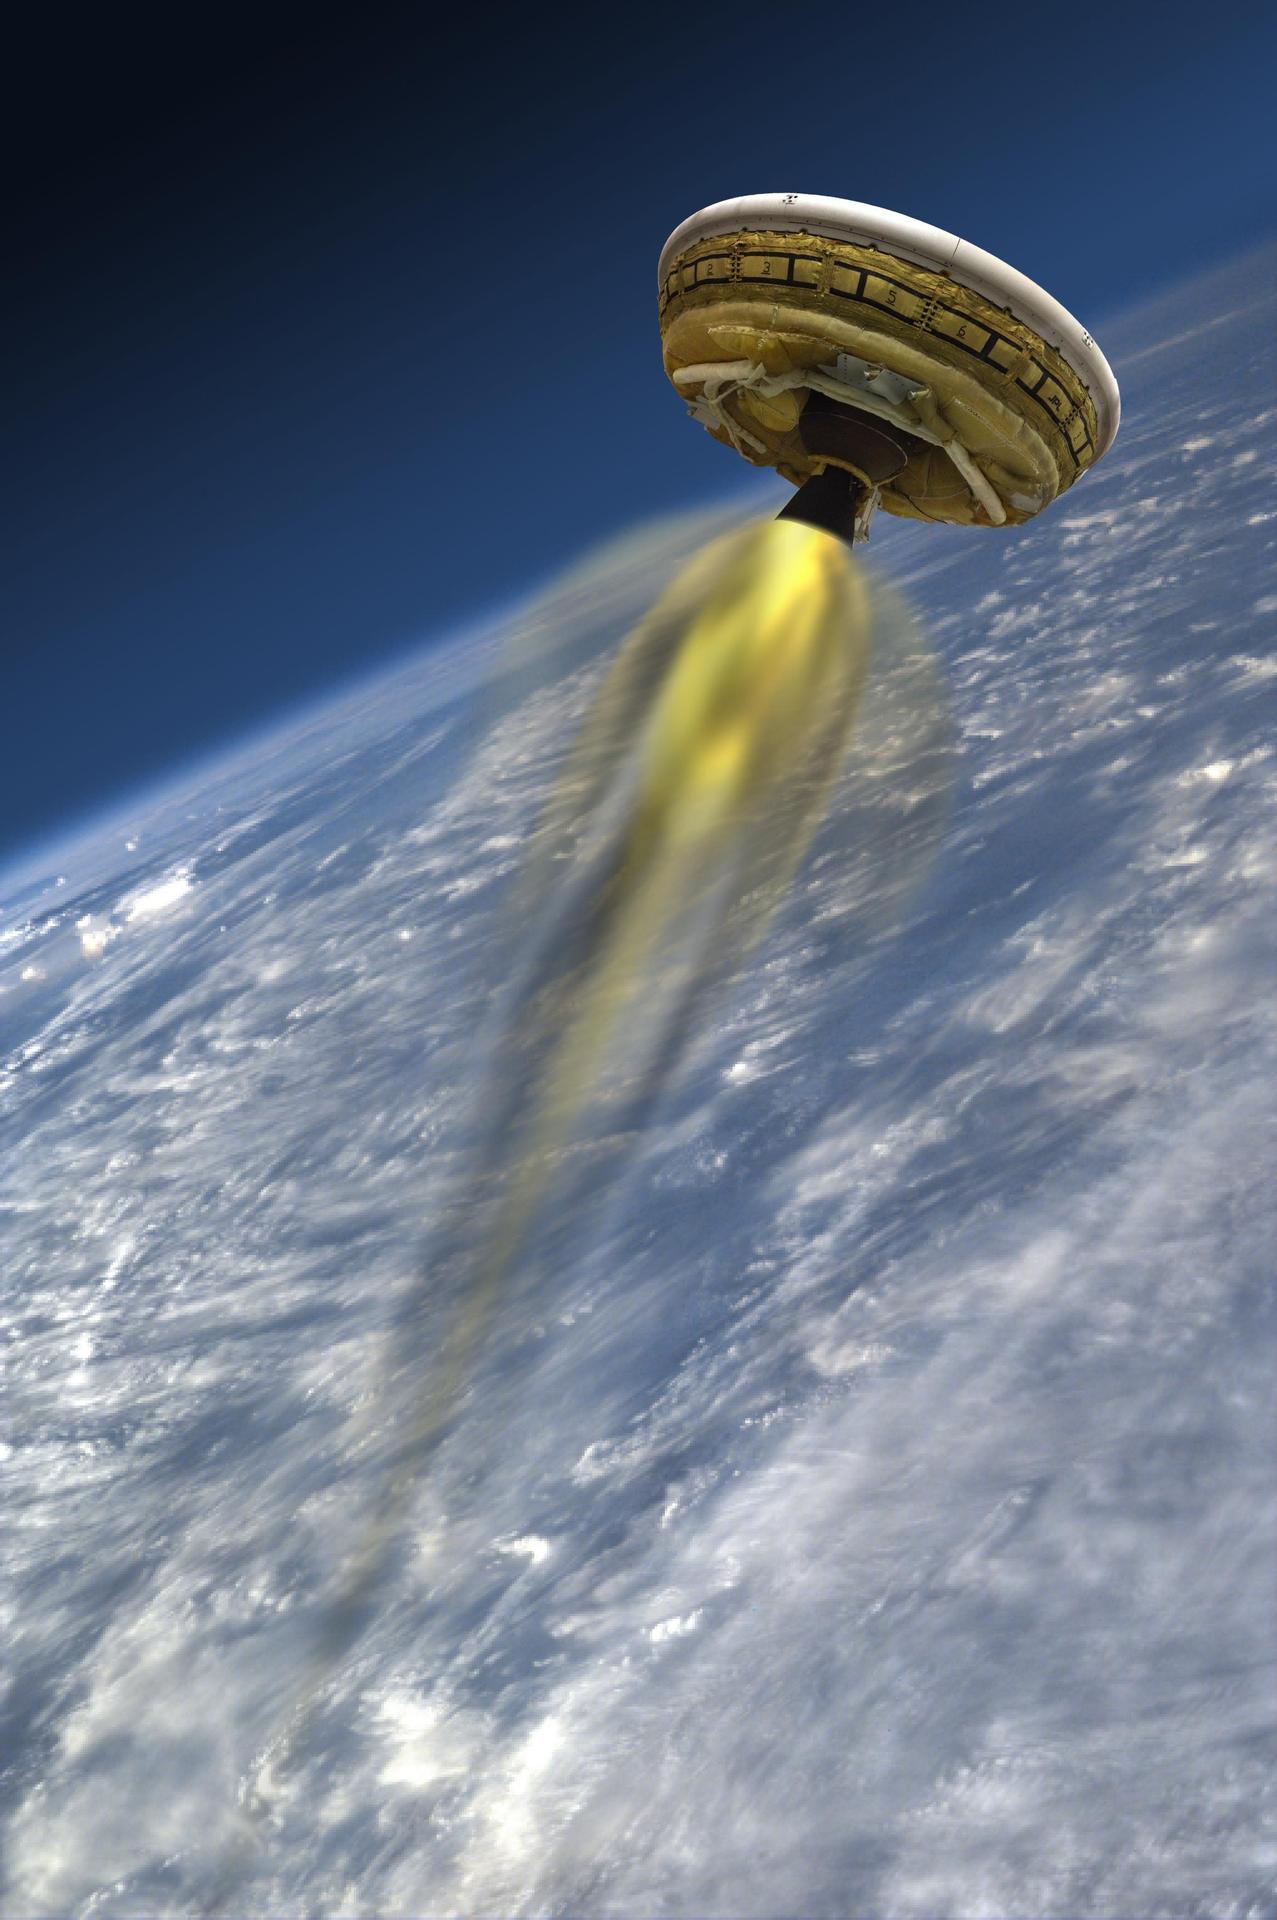 Disc shaped spacecraft reentering atmosphere firing a large central rocket